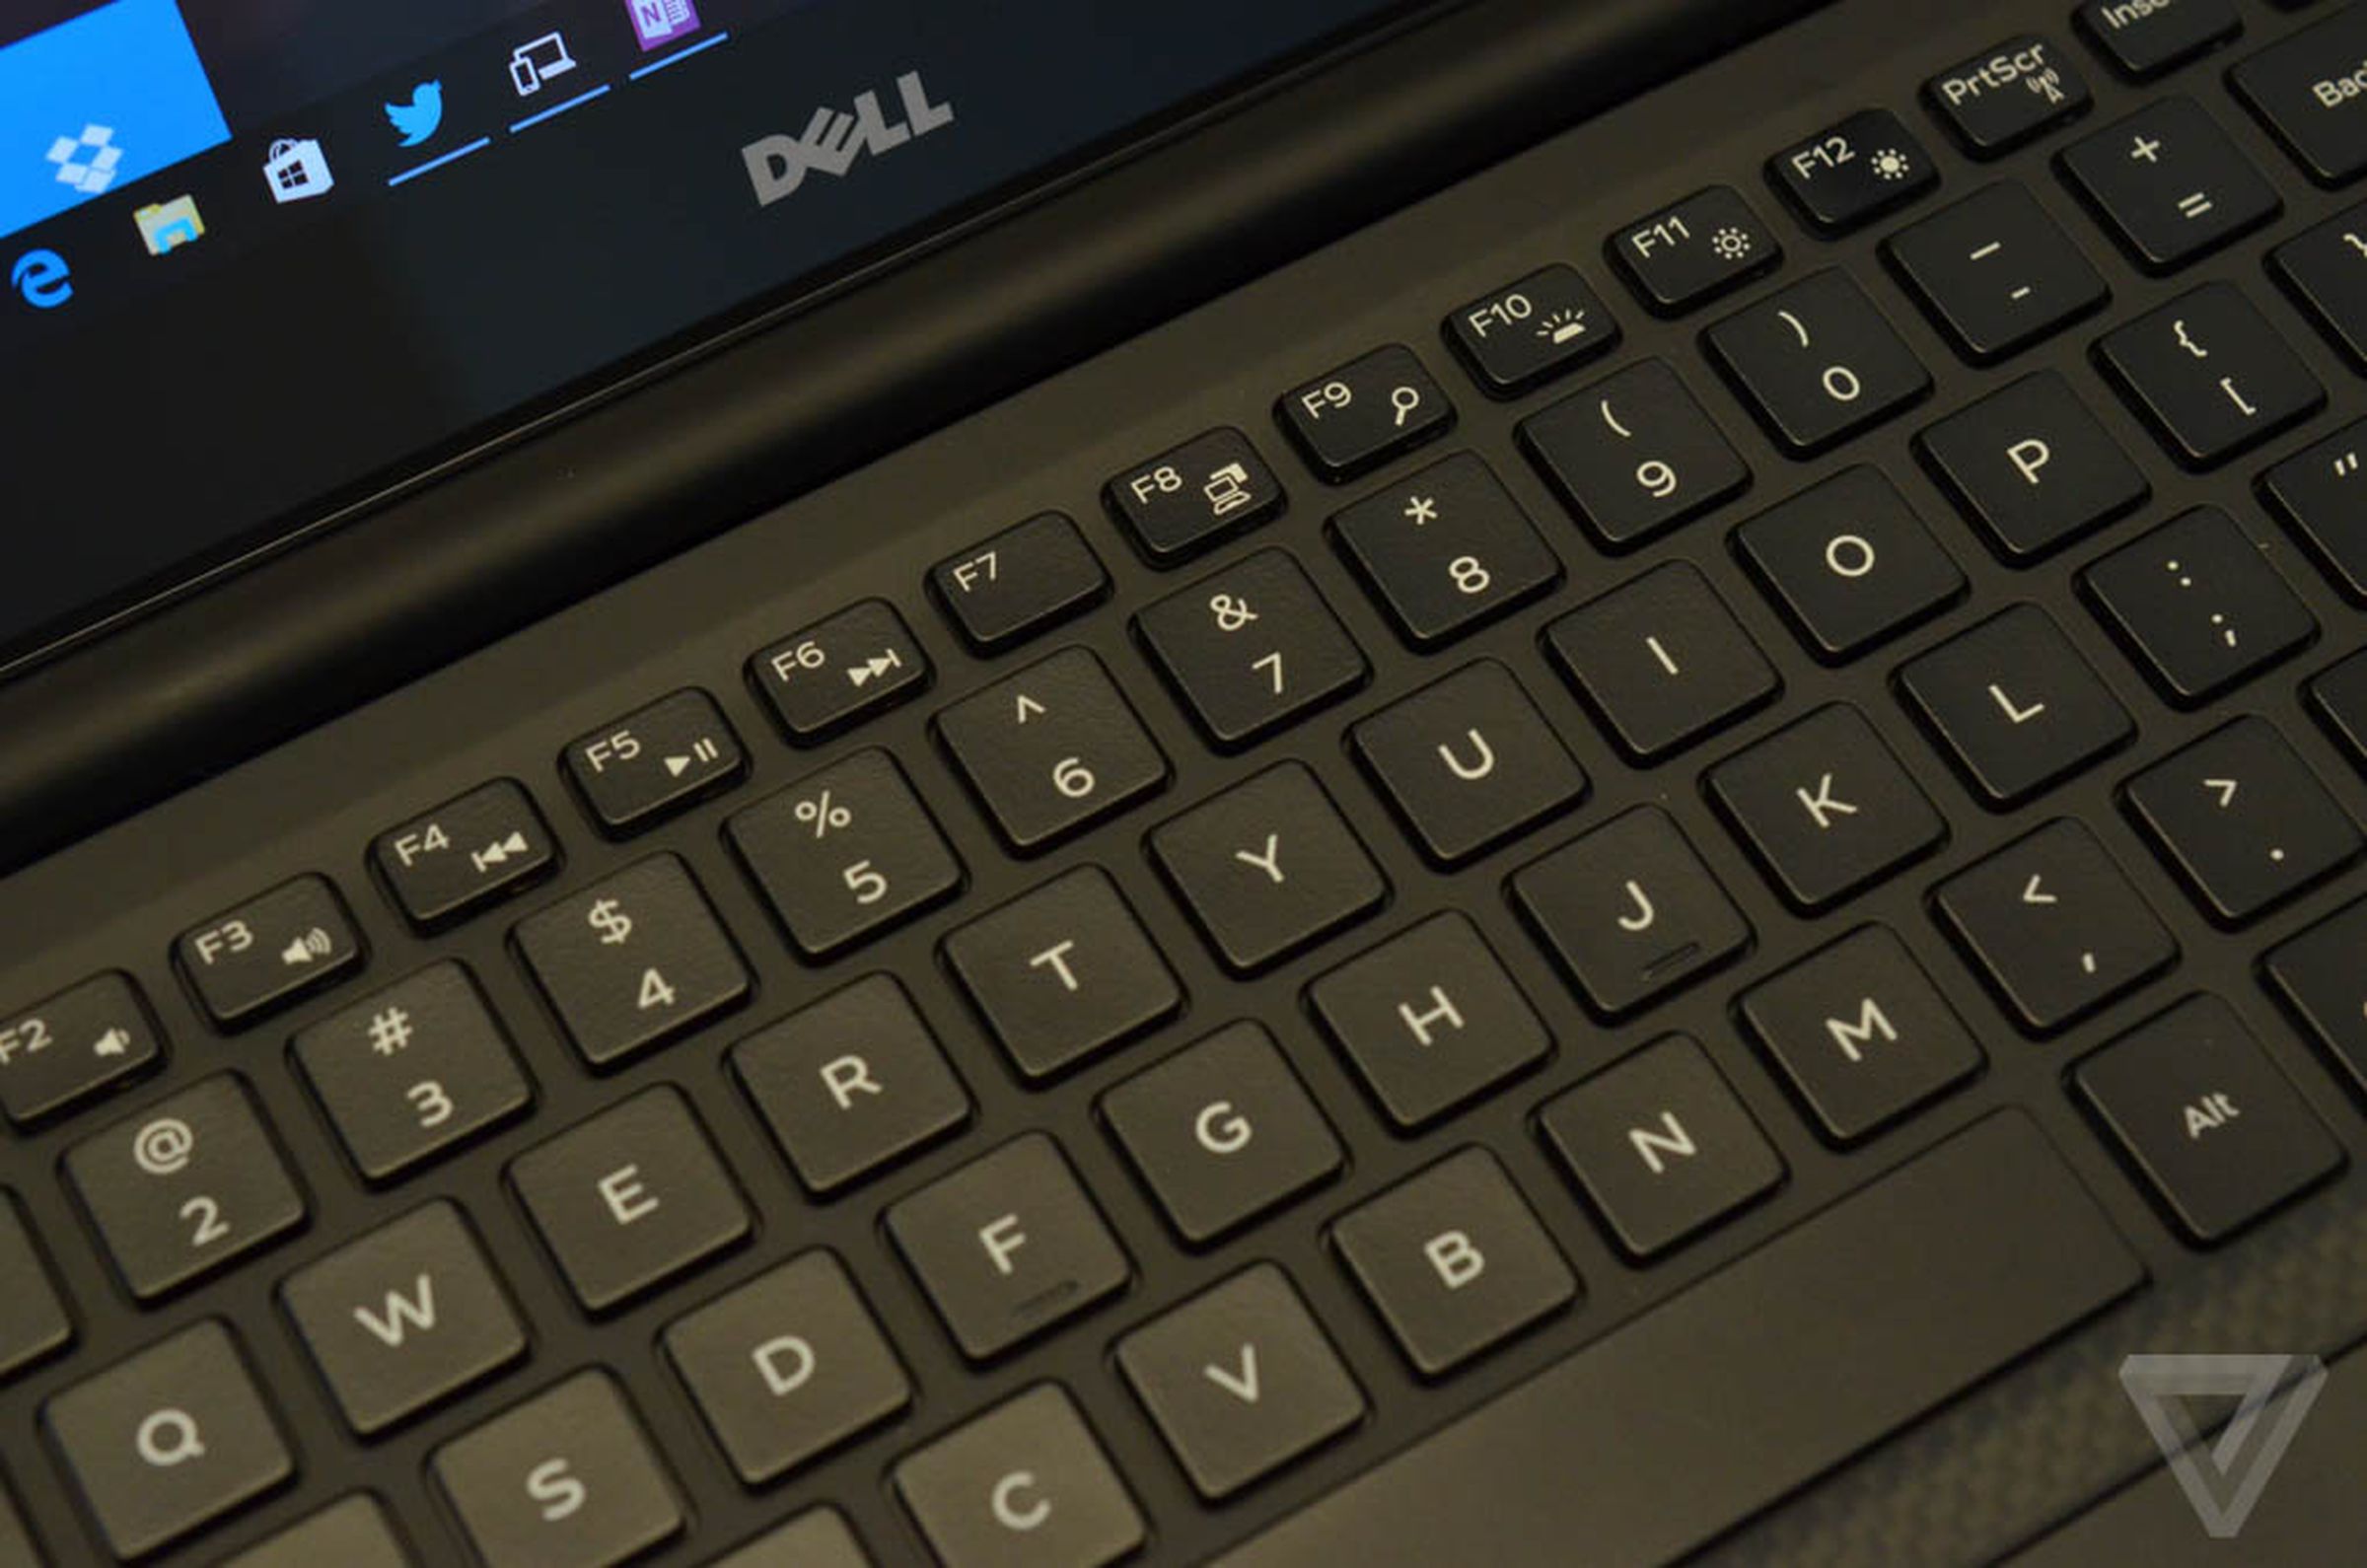 Dell XPS 15 (2015) hands-on photos